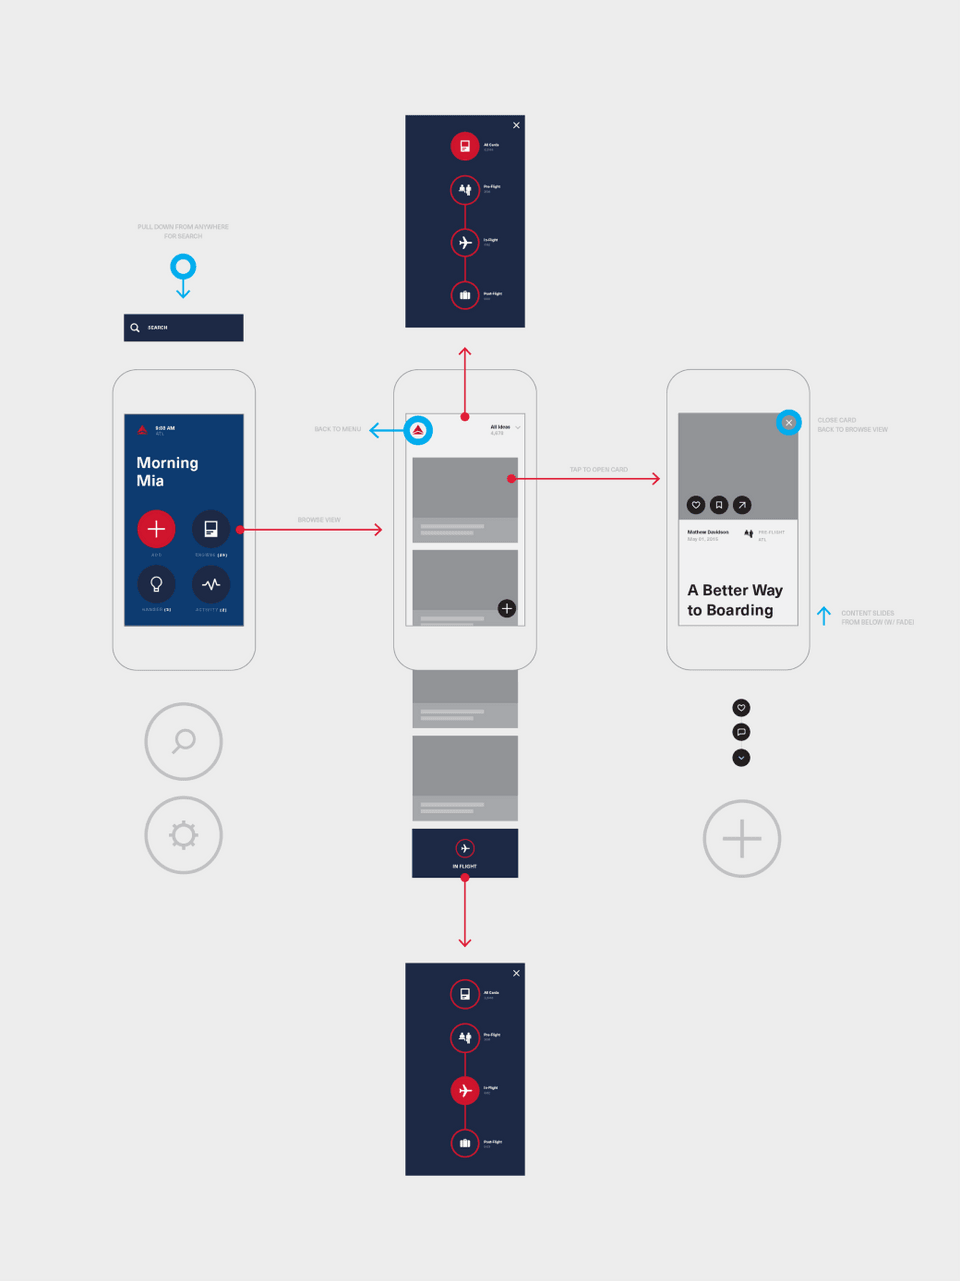 Graphic depicting how a user might navigate an imagined Delta app on a smartphone.